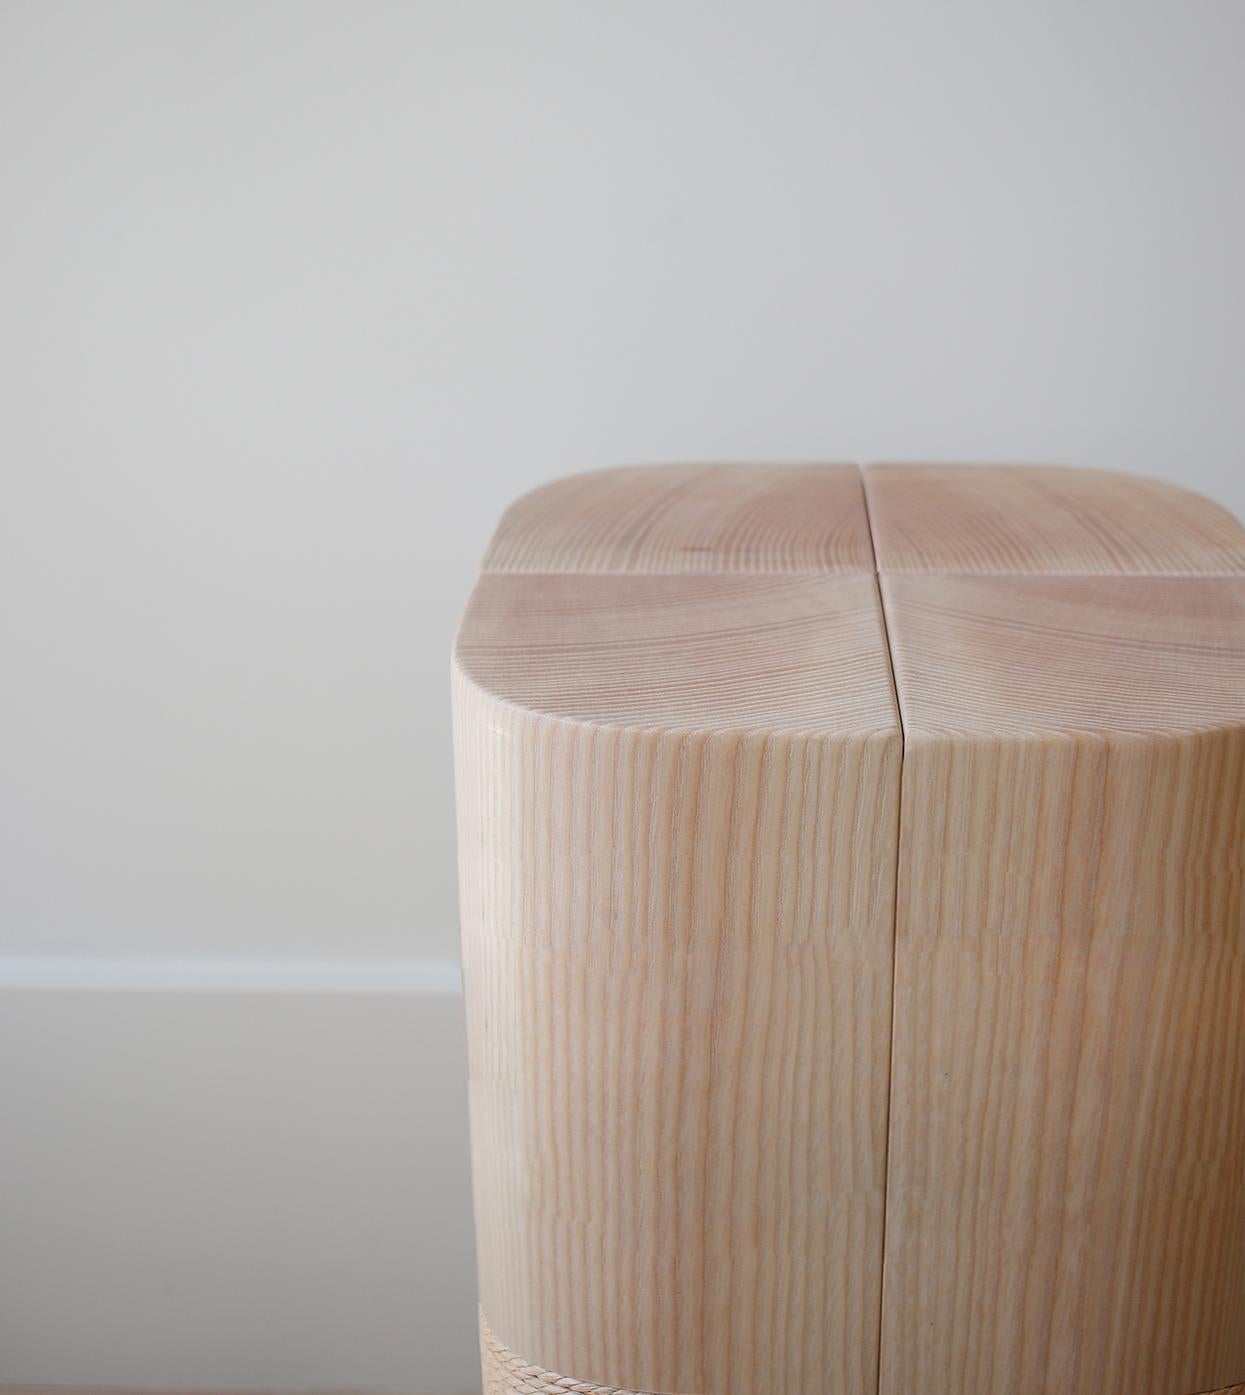 The Monolith Plinth is a fascinating typology of furniture – one that lies between object and furniture, between sculpture and pedestal. This plinth elegantly brings out the beauty of wood, via construction without glue, and being held together by